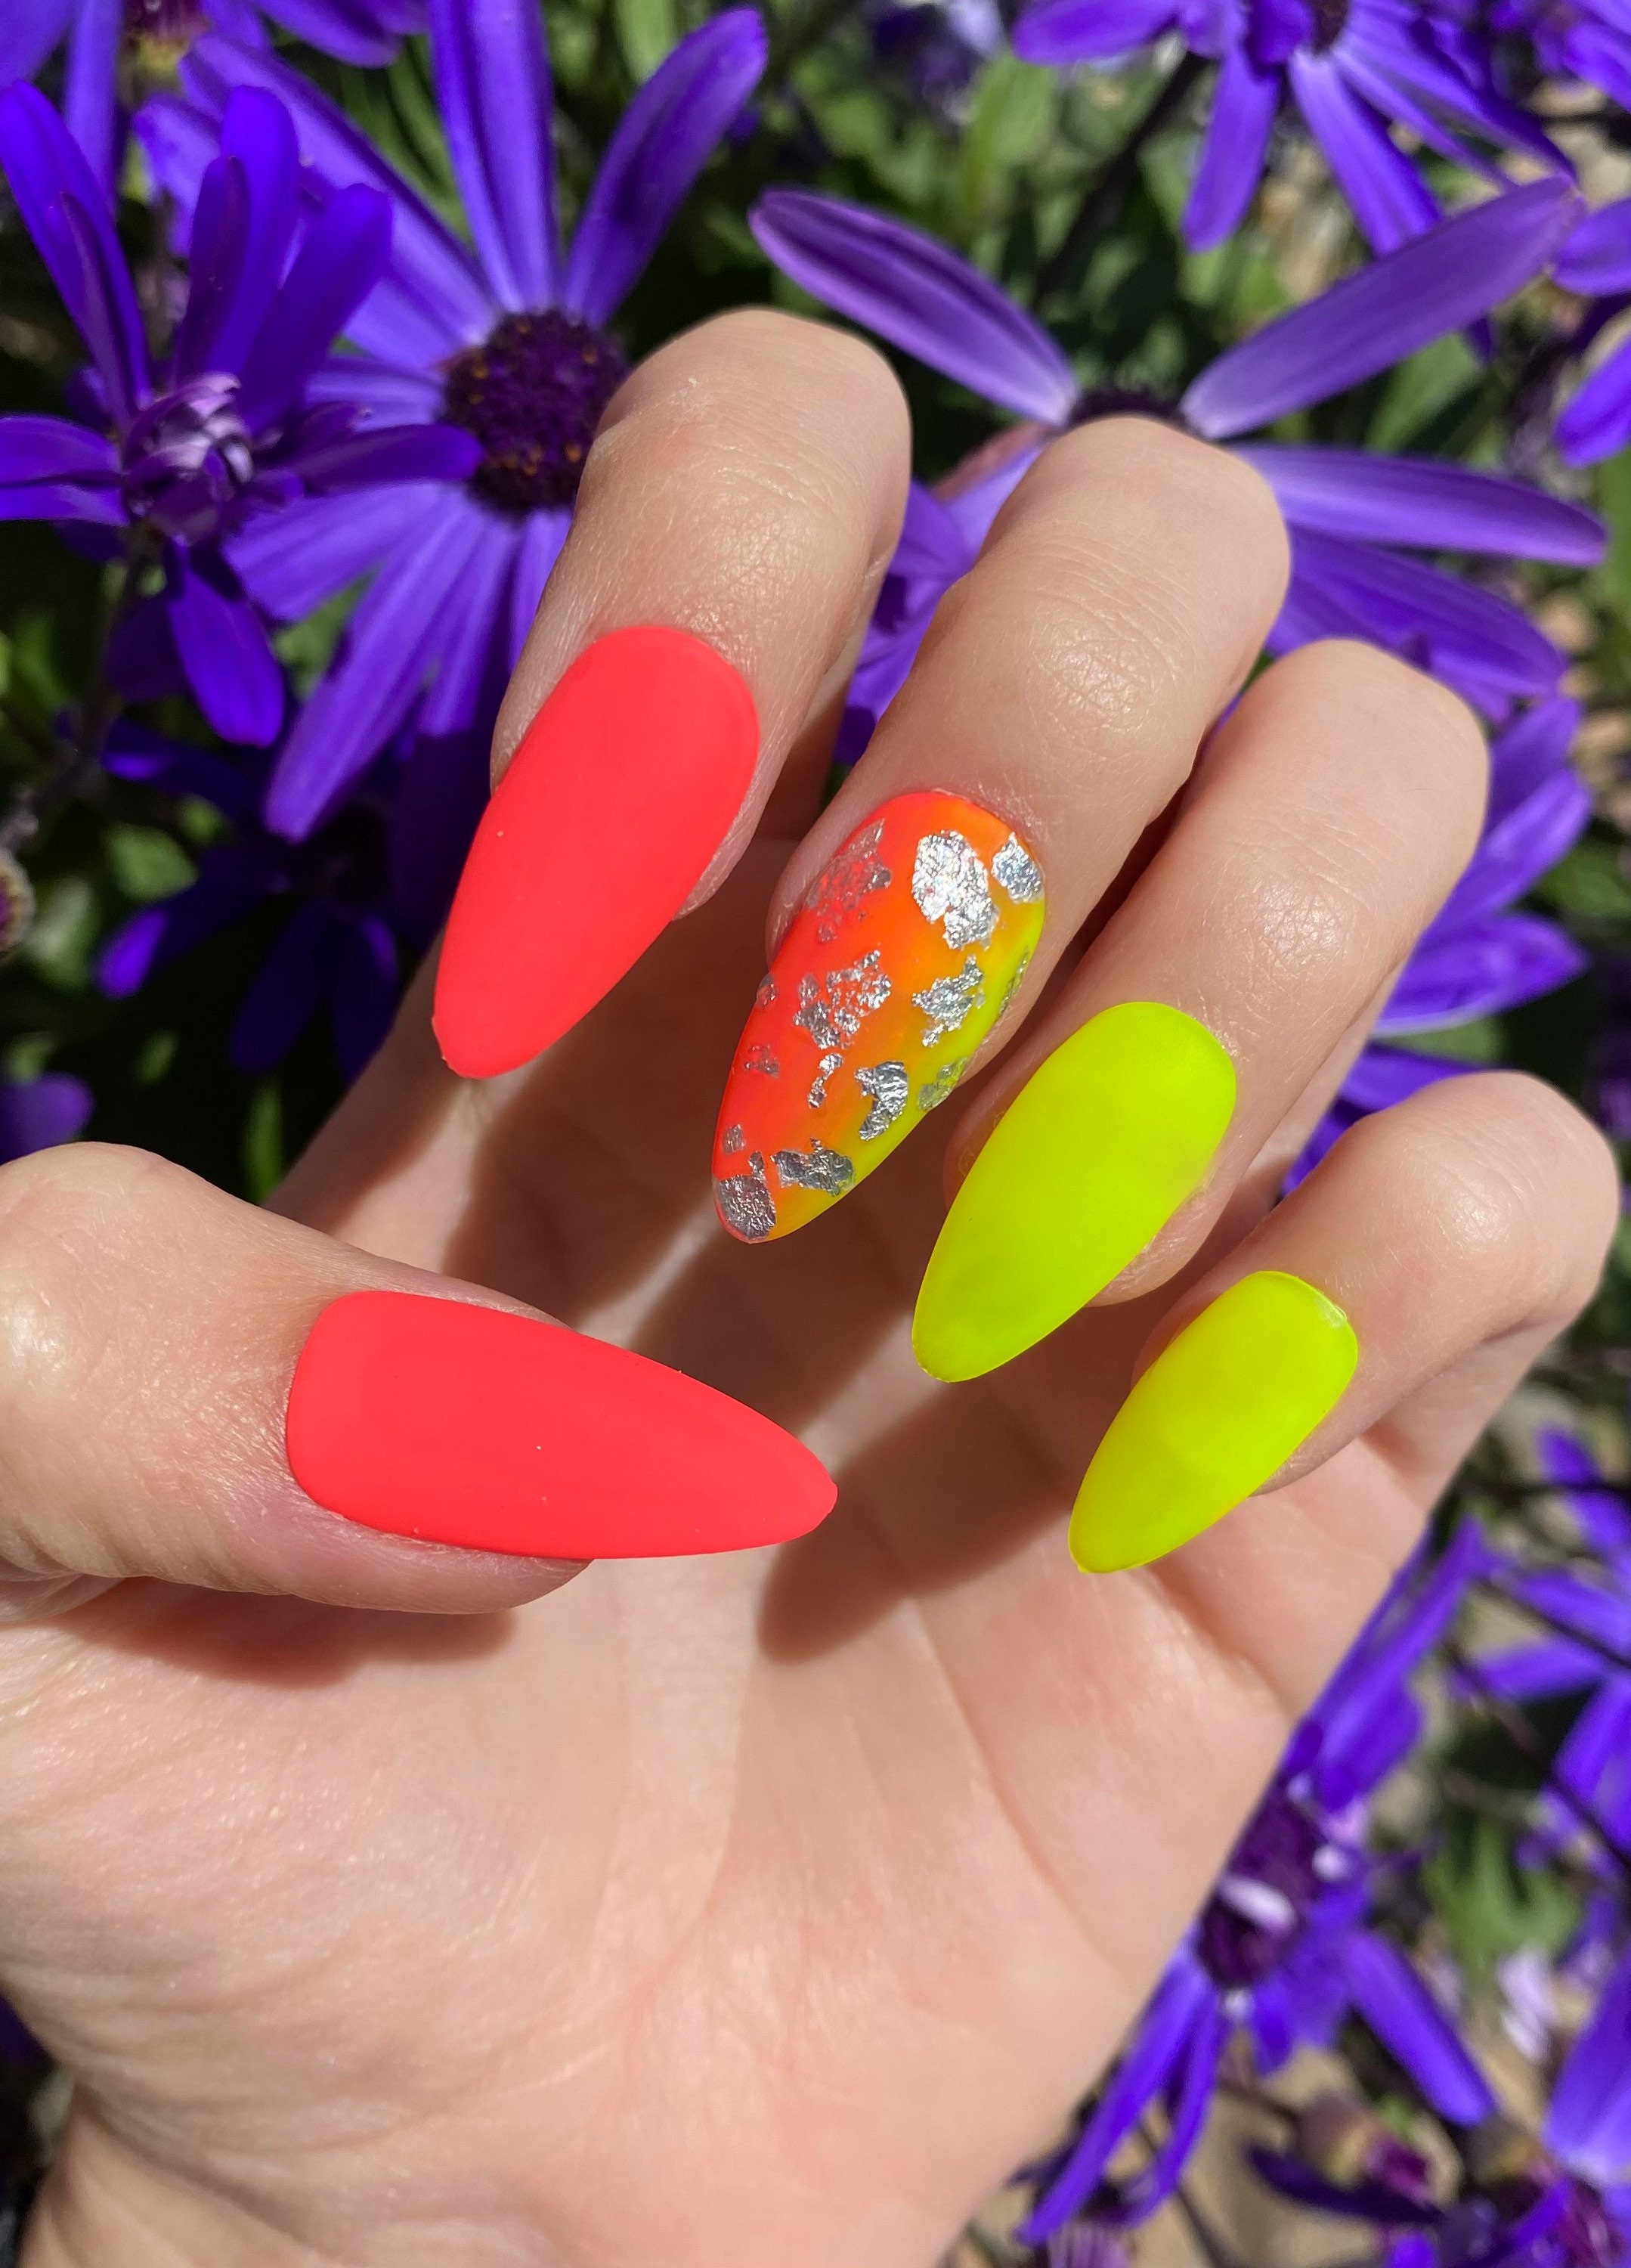 Buy Neon Fake Nails Extremely Long Bright Orange Shiny Press On Nail  Carnival Style Decoraion Manicure Tips Salon Nails 24 Online at Low Prices  in India - Amazon.in